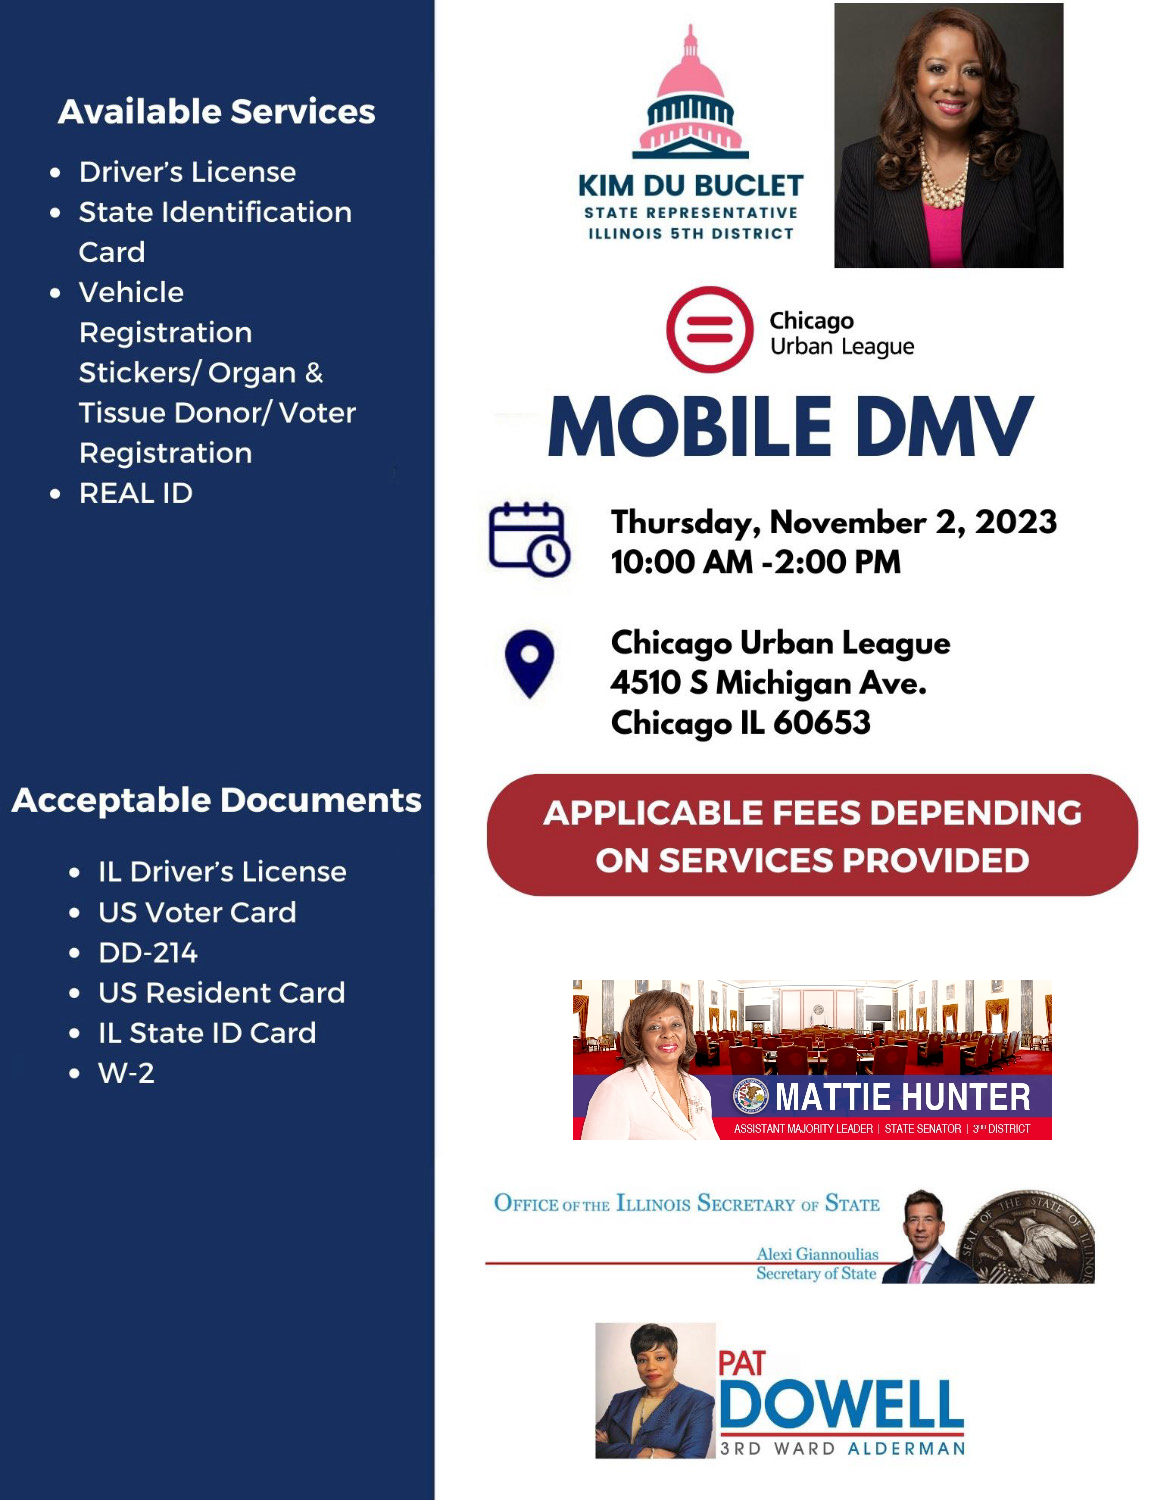 Mobile DMV Thursday, November 2, 2023, 10 a.m. to 2 p.m. at Chicago Urban League, 4510 South Michigan Avenue, Chicago. Available services include driver's license, state identification card, vehicle registration stickers, organ and tissue donor registration, voter registration, REAL ID. Acceptable documents include Illinois driver's license, U.S. voter card, DD-214, Illinois state ID card, W-2. Applicable fees depending on services provided.